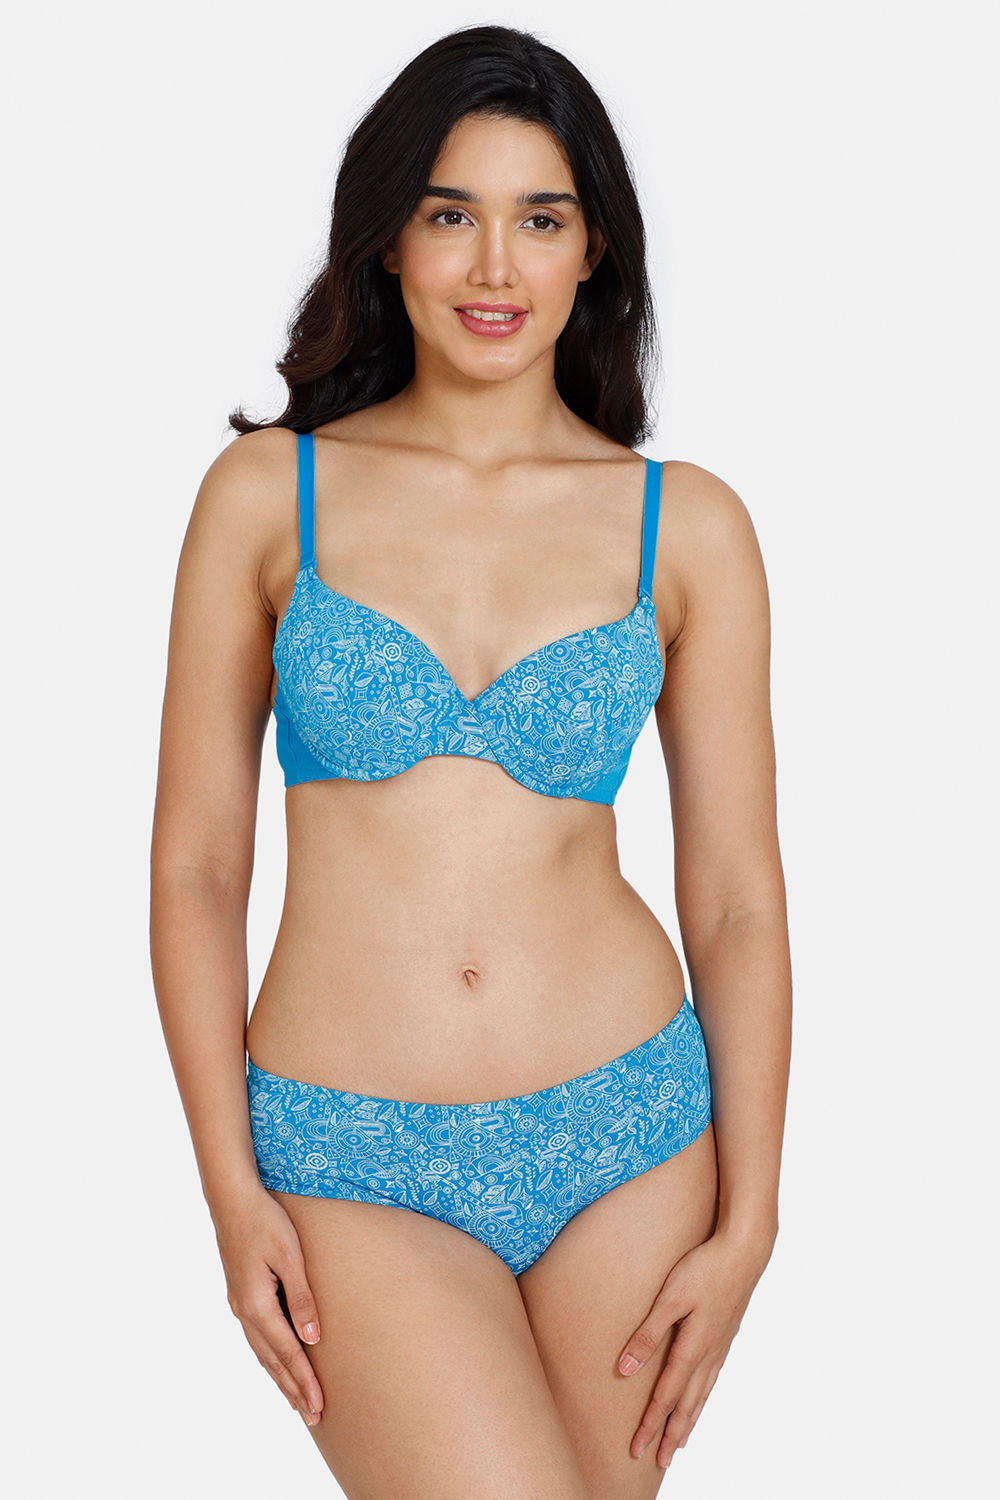 36A Bra Size - Buy 36A Bras Online in India